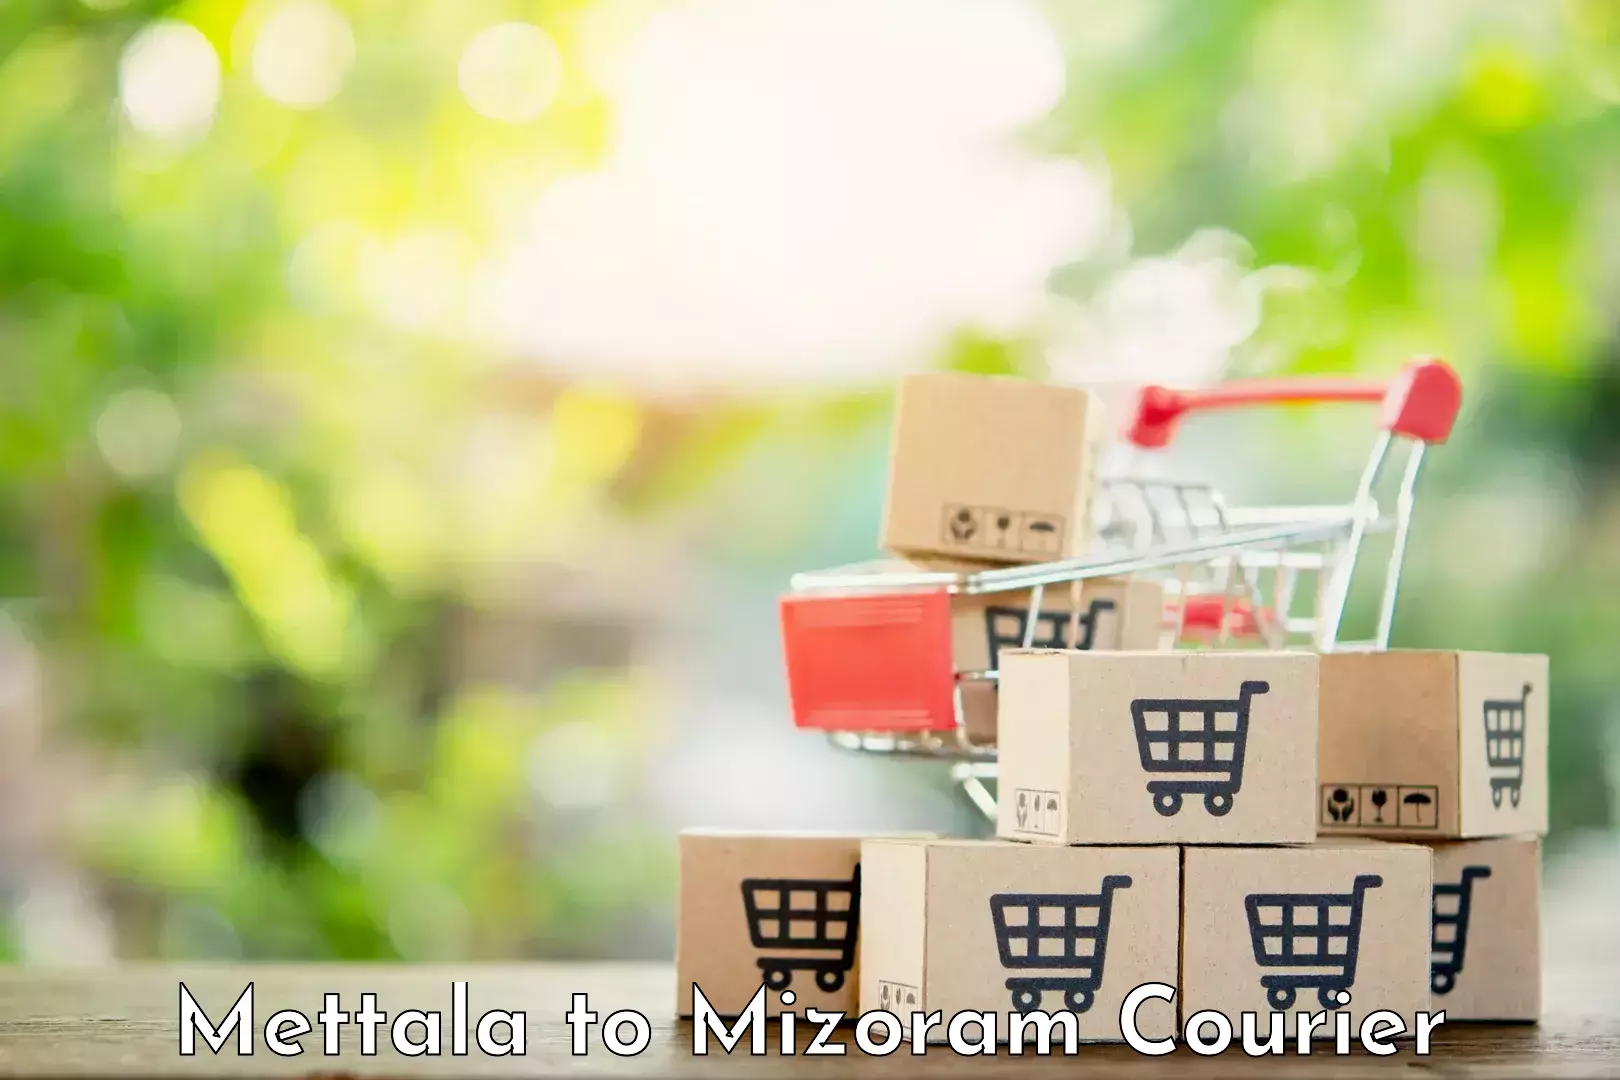 Same-day delivery solutions Mettala to Mizoram